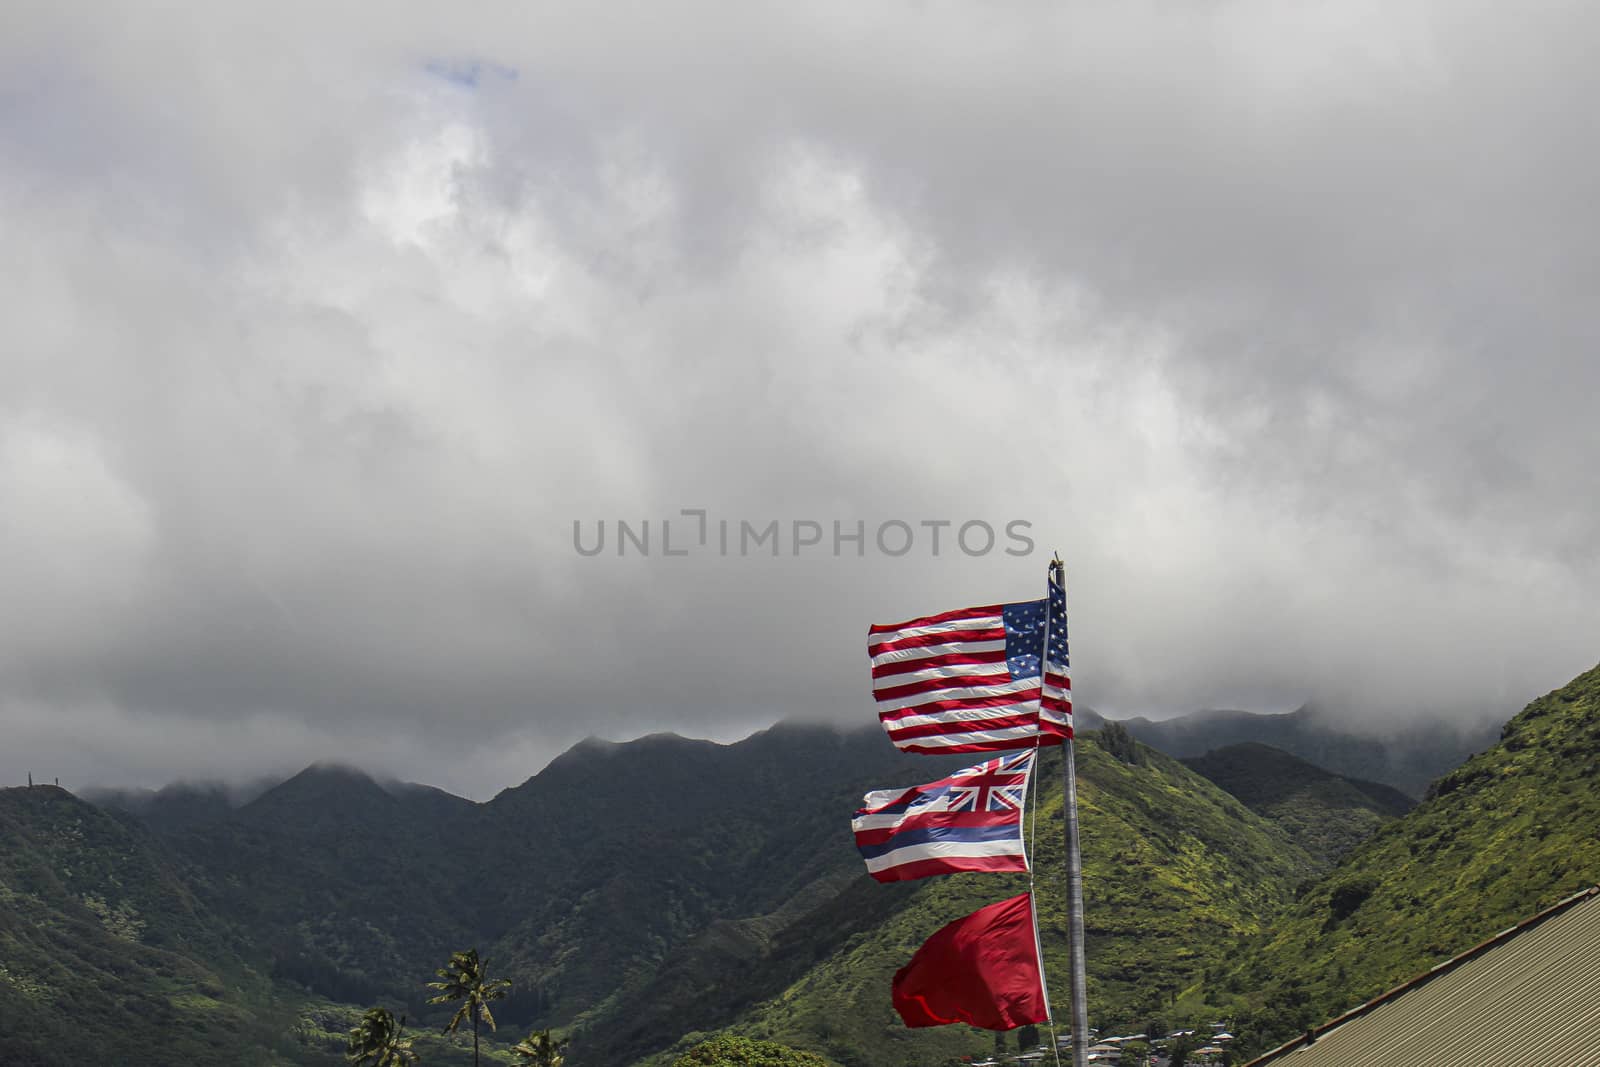 USA flag at Hawaii green hills on a cloudy day by oasisamuel